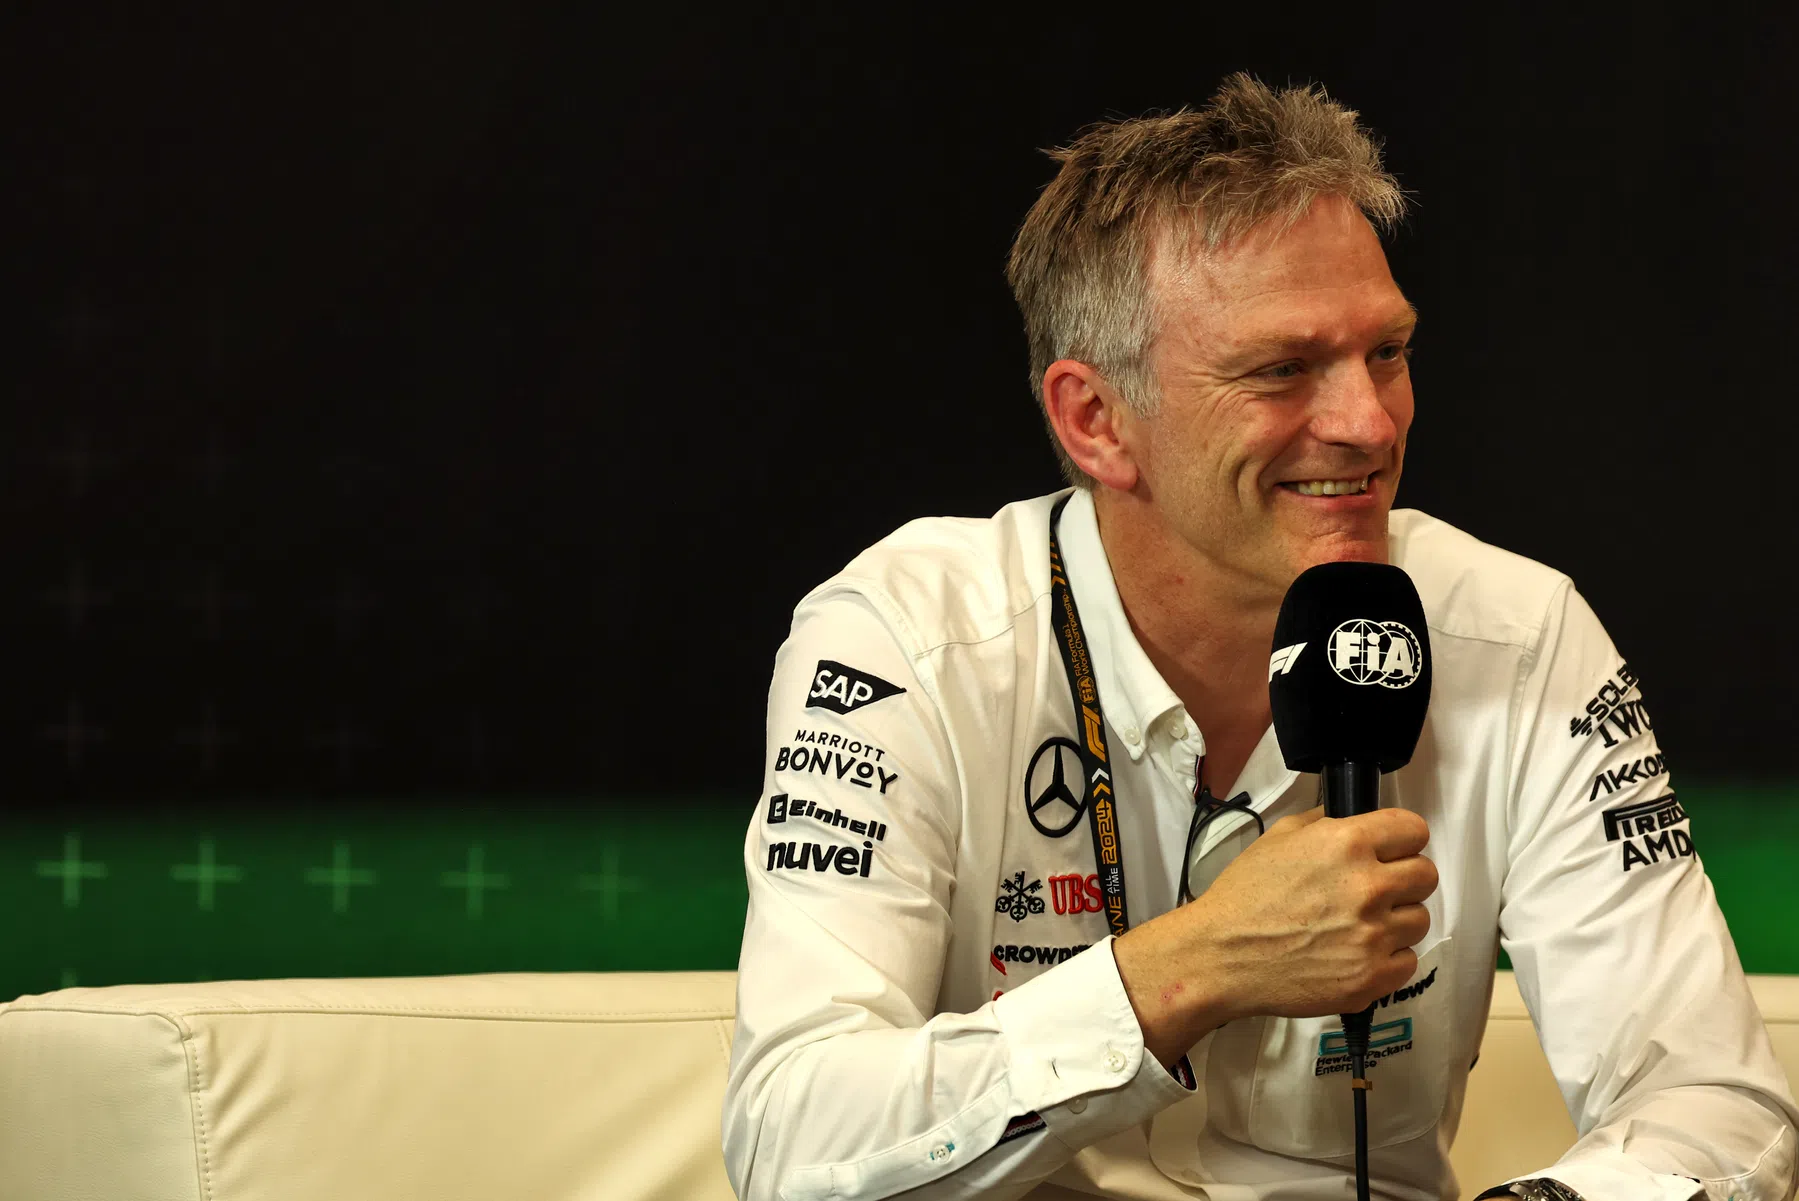 james allison jokes about form red bull and sees upgrade as downgrade